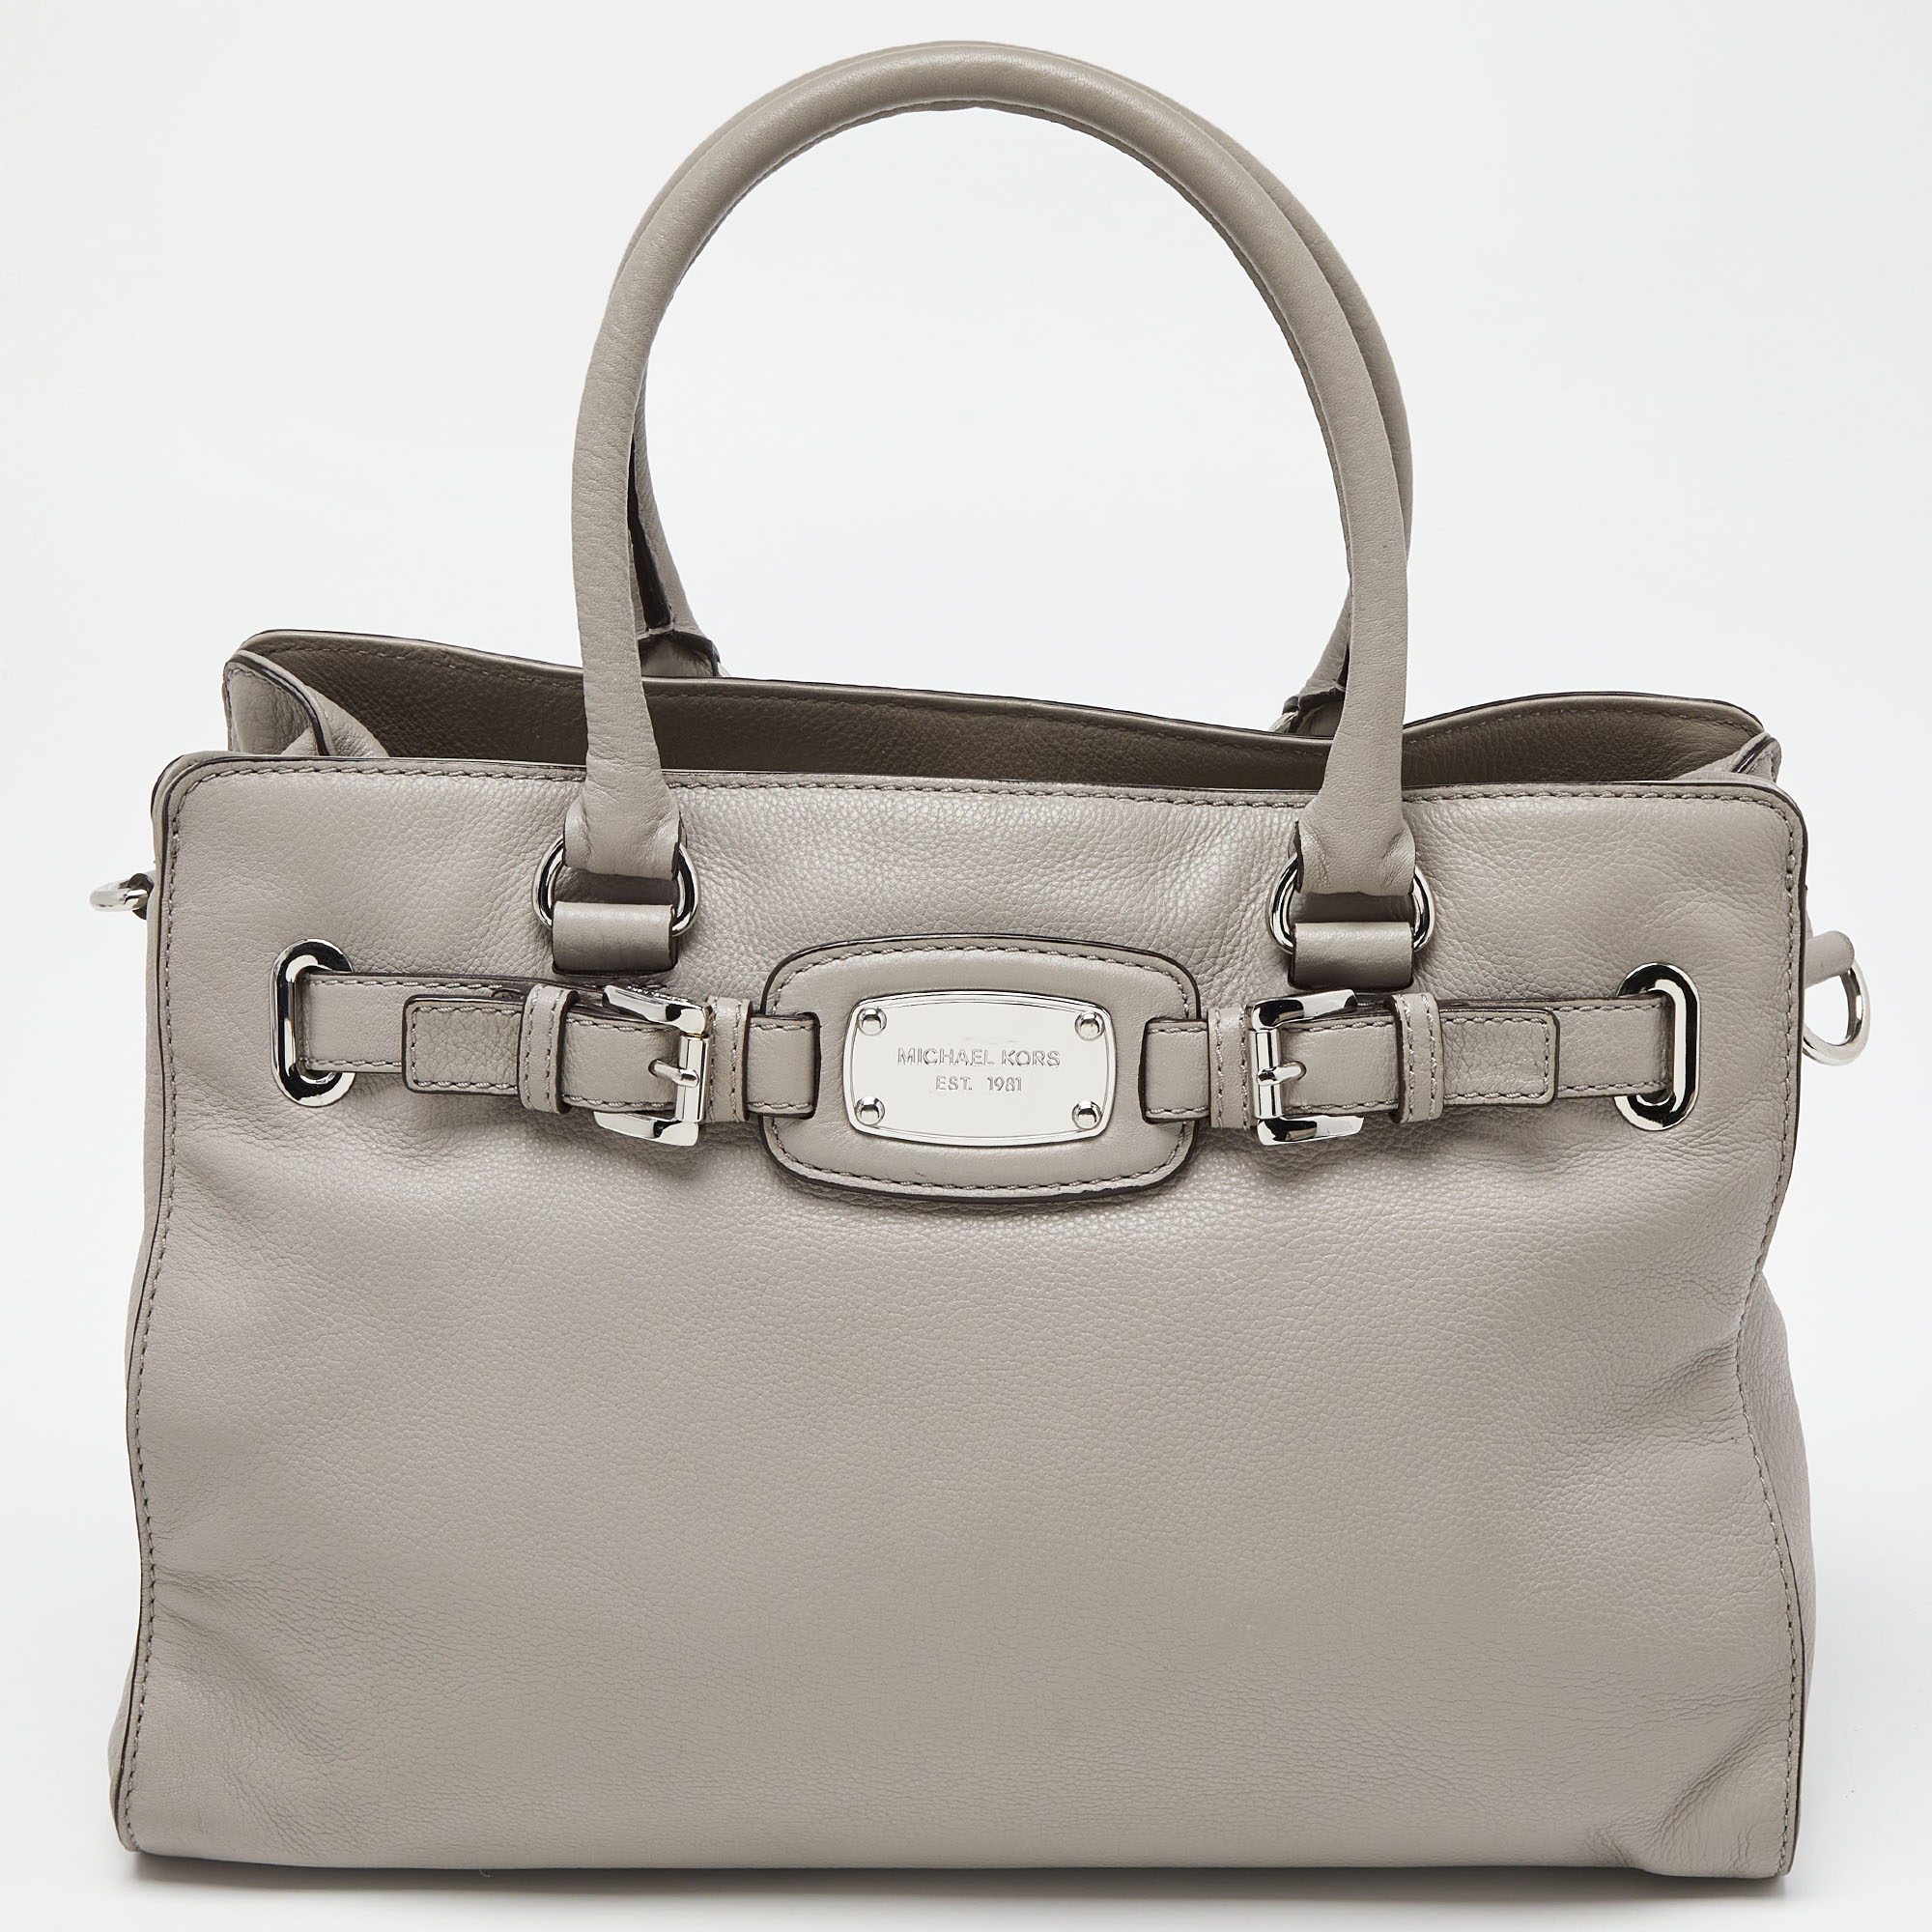 This elegant MK Dillon bag deserves to be in your closet. High in appeal the bag features dual handles and a front brand plaque. Its crafted from grey Saffiano leather and the fabric lined interior houses pockets.